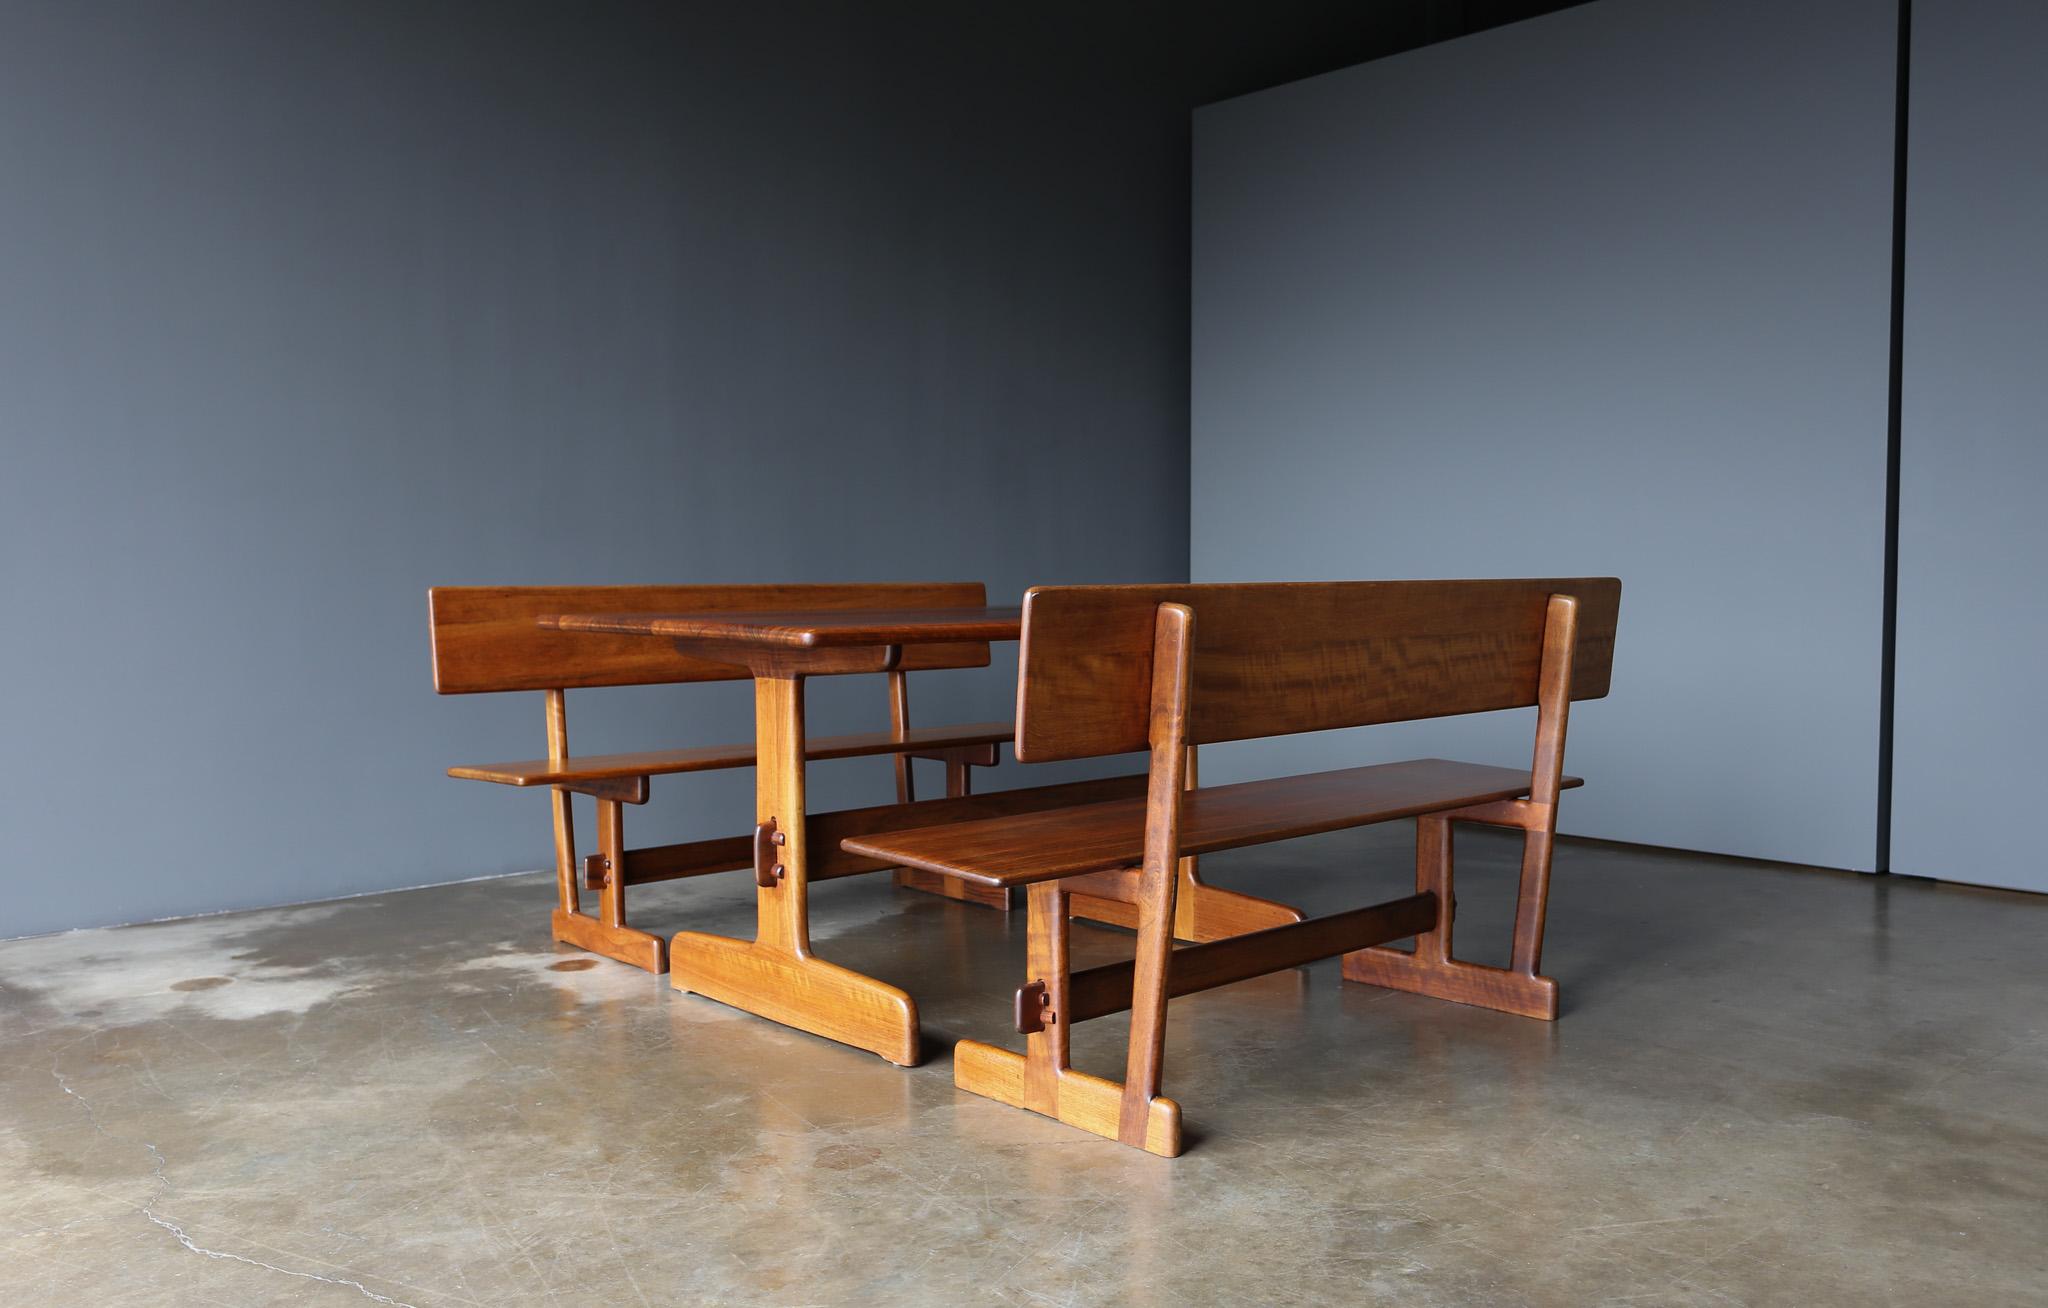 Gerald McCabe Shedua Trestle Dining Table & Benches for Orange Crate Modern.  Santa Monica, California, c.1980.  
Makers mark to the bottom of the table.  One bench is hand signed to the bottom.  Beautiful shedua wood grain throughout.  

Dining